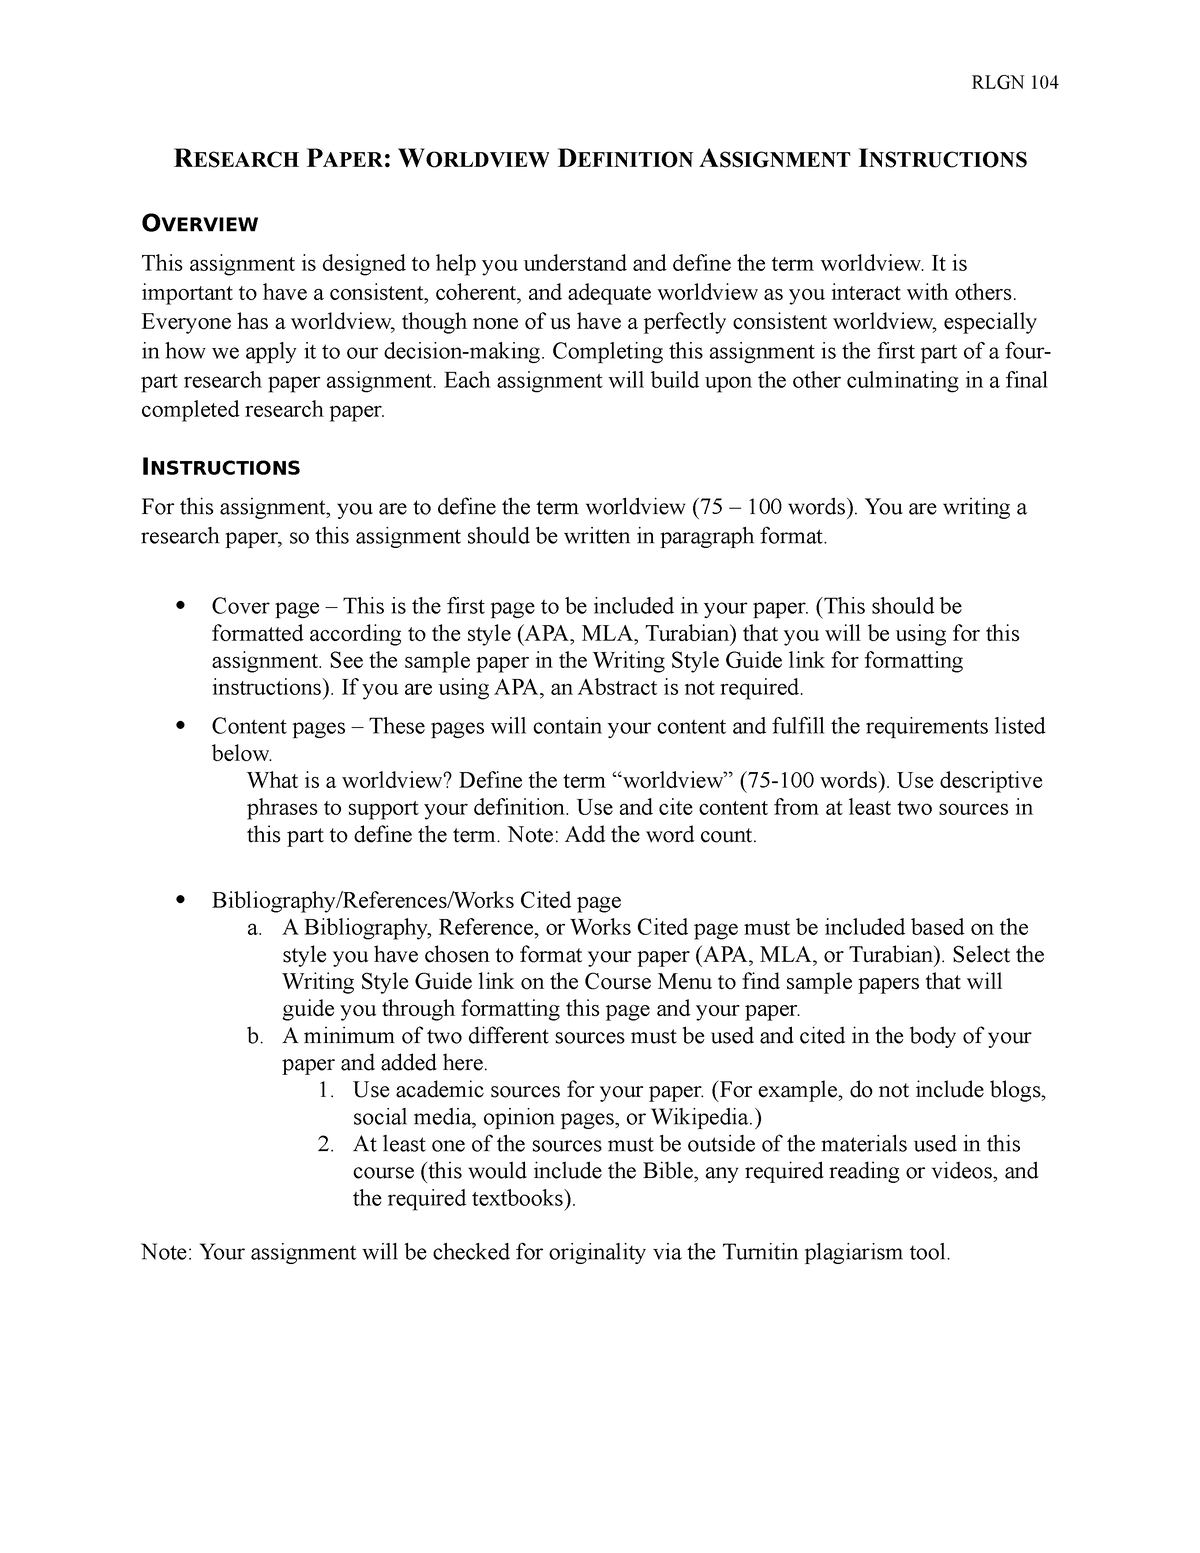 worldview research paper assignment